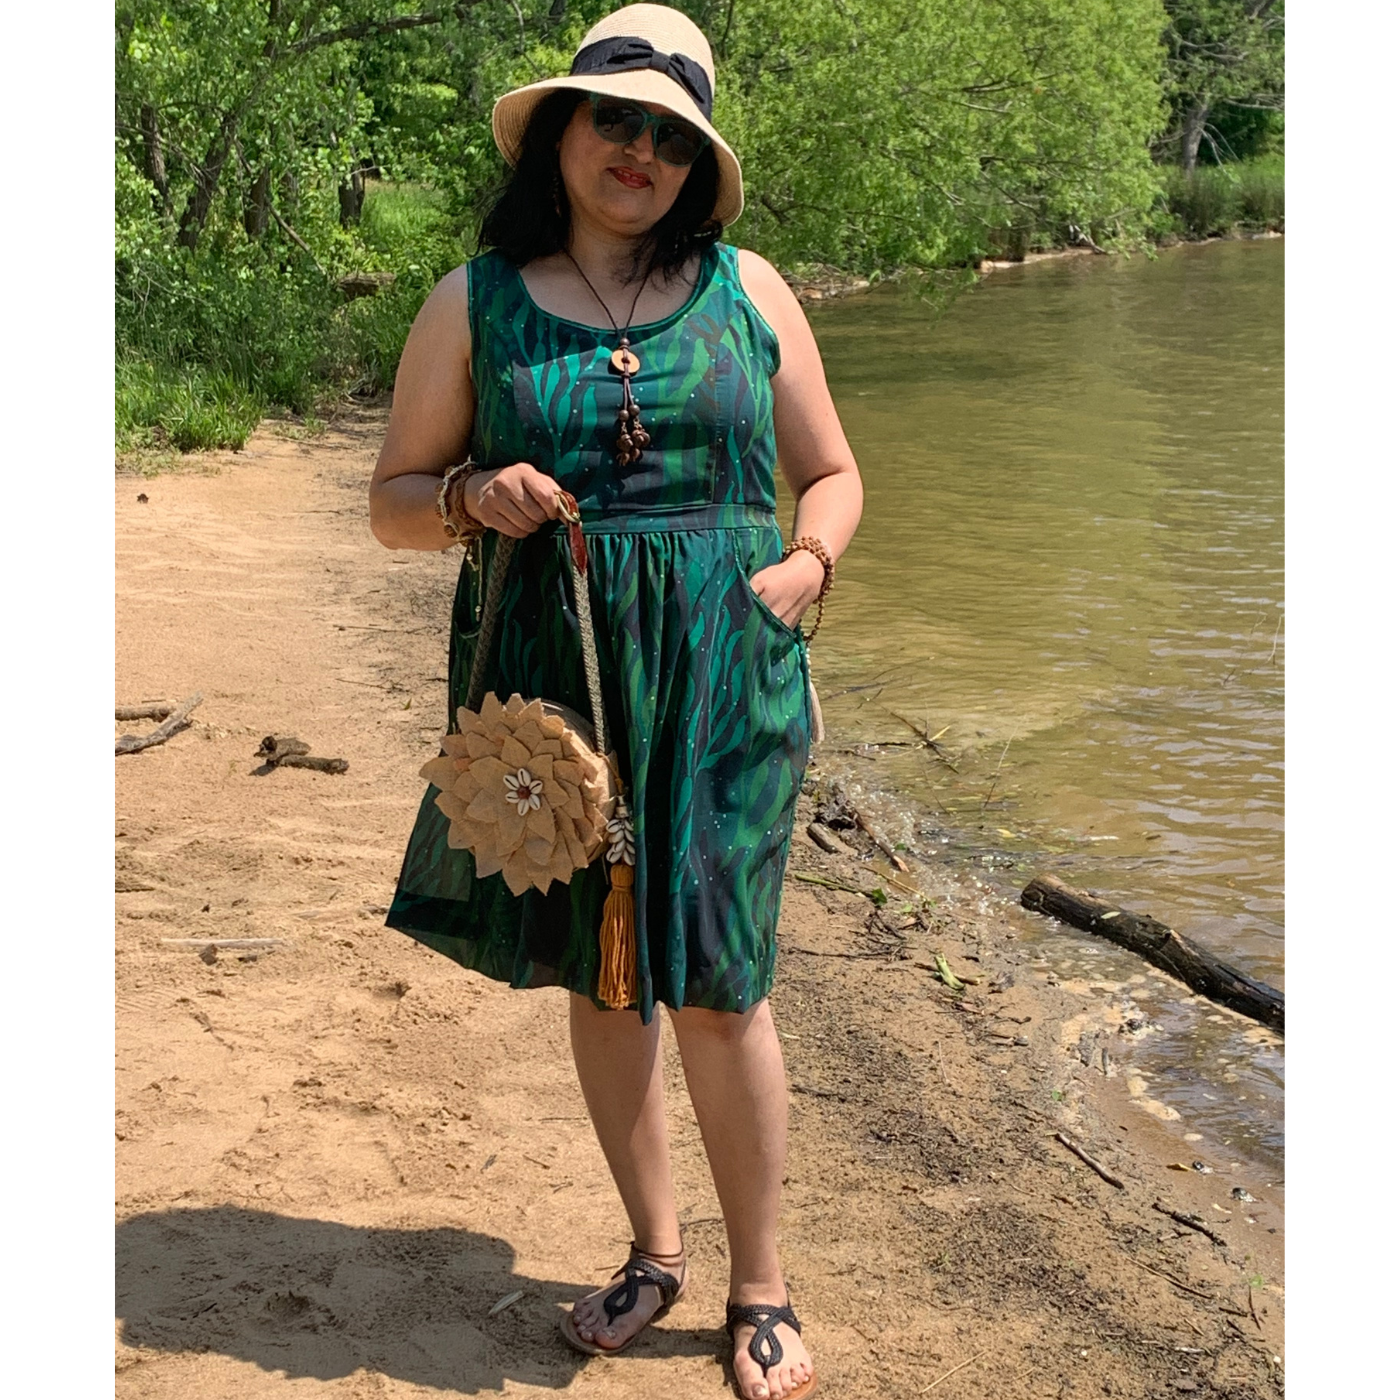 Nisha stands in the sand by a riverbank wearing a light brown sun hat and a sleeveless green dress featuring a design with black and green seaweed flowing in all directions. She is holding a brown floral purse and her left hand is in her pocket.